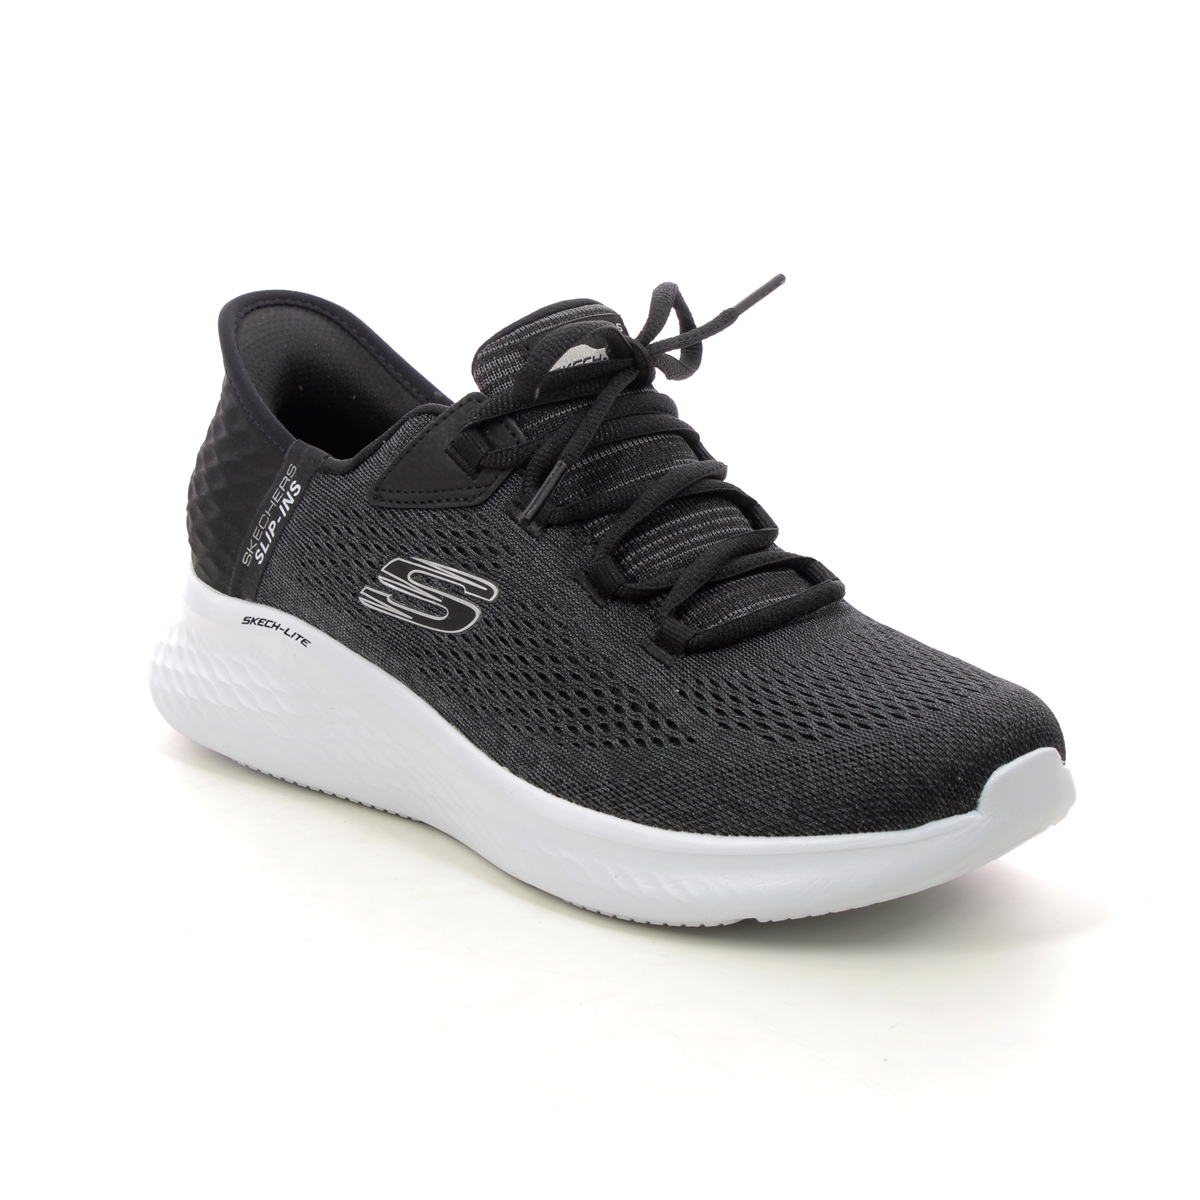 Skechers Slip Ins Lace BKW Black White Womens trainers 150012 in a Plain Textile in Size 3